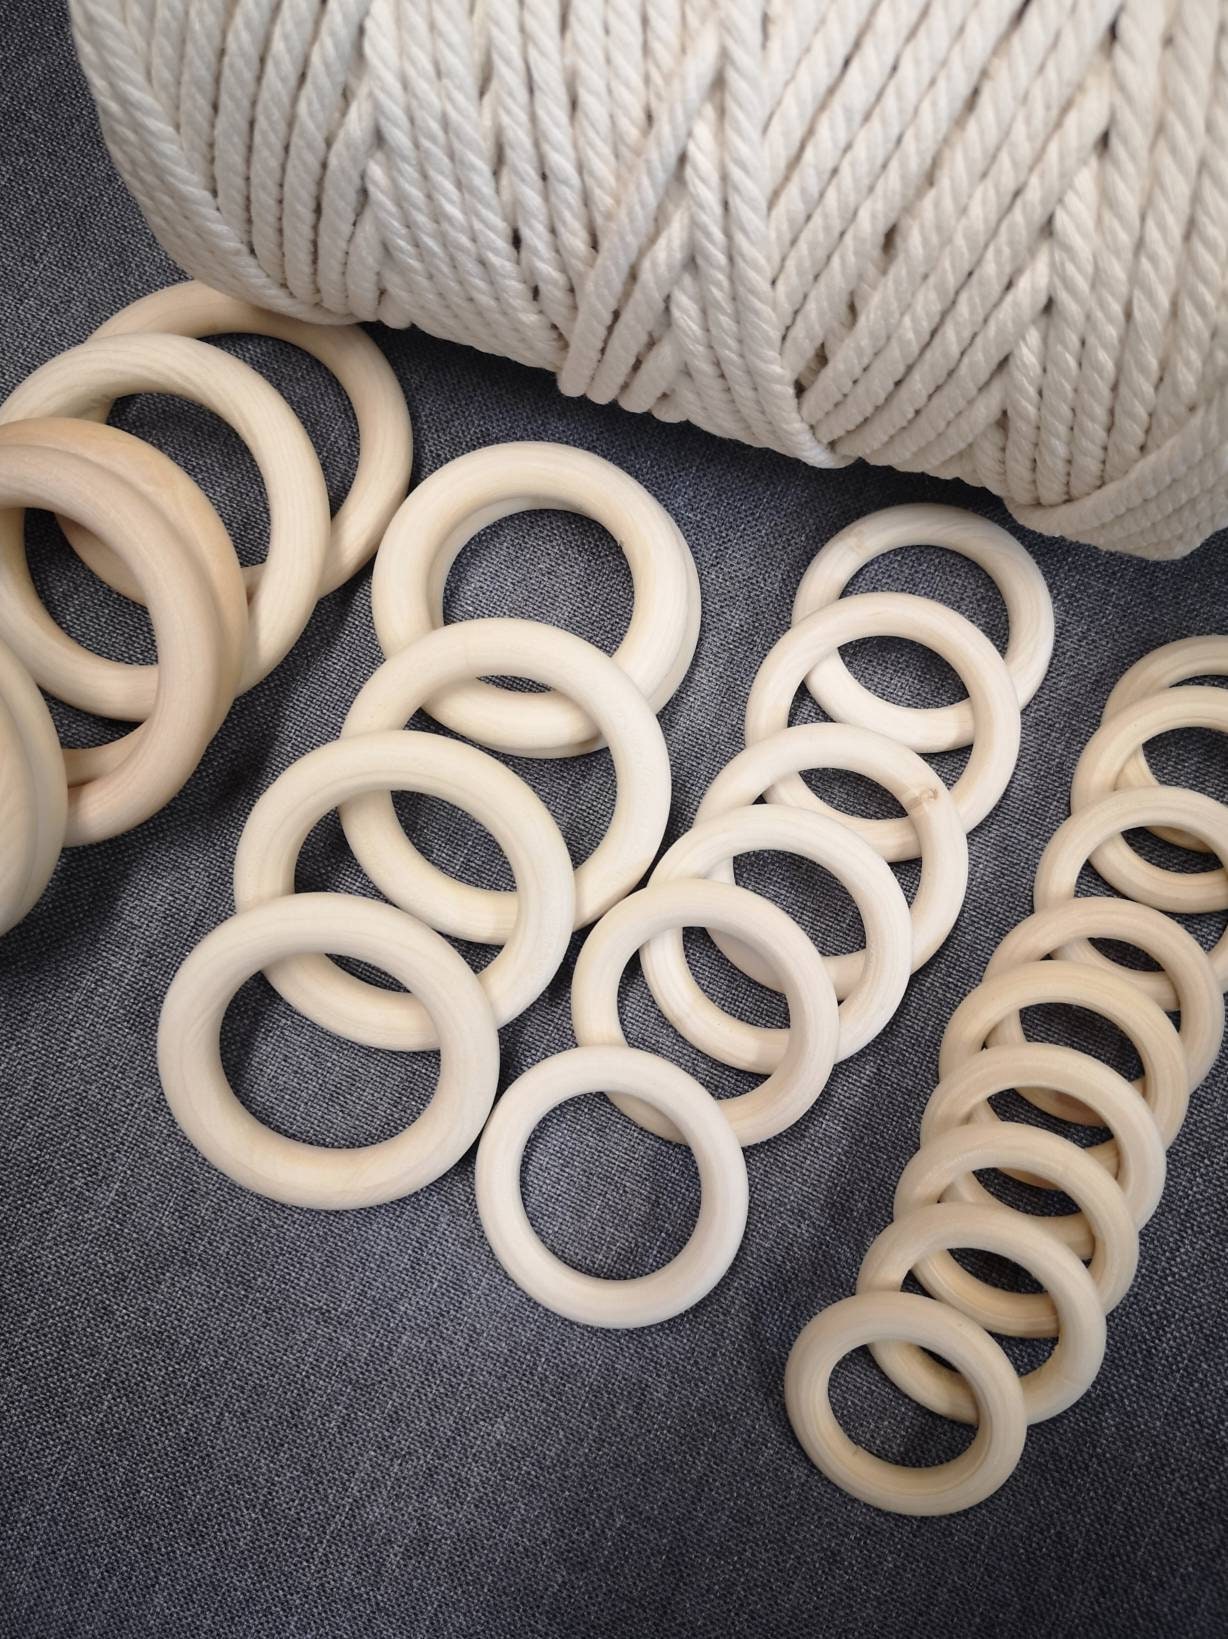 NATURAL WOODEN RINGS - 13 Size Unfinished Wooden Macrame Rings